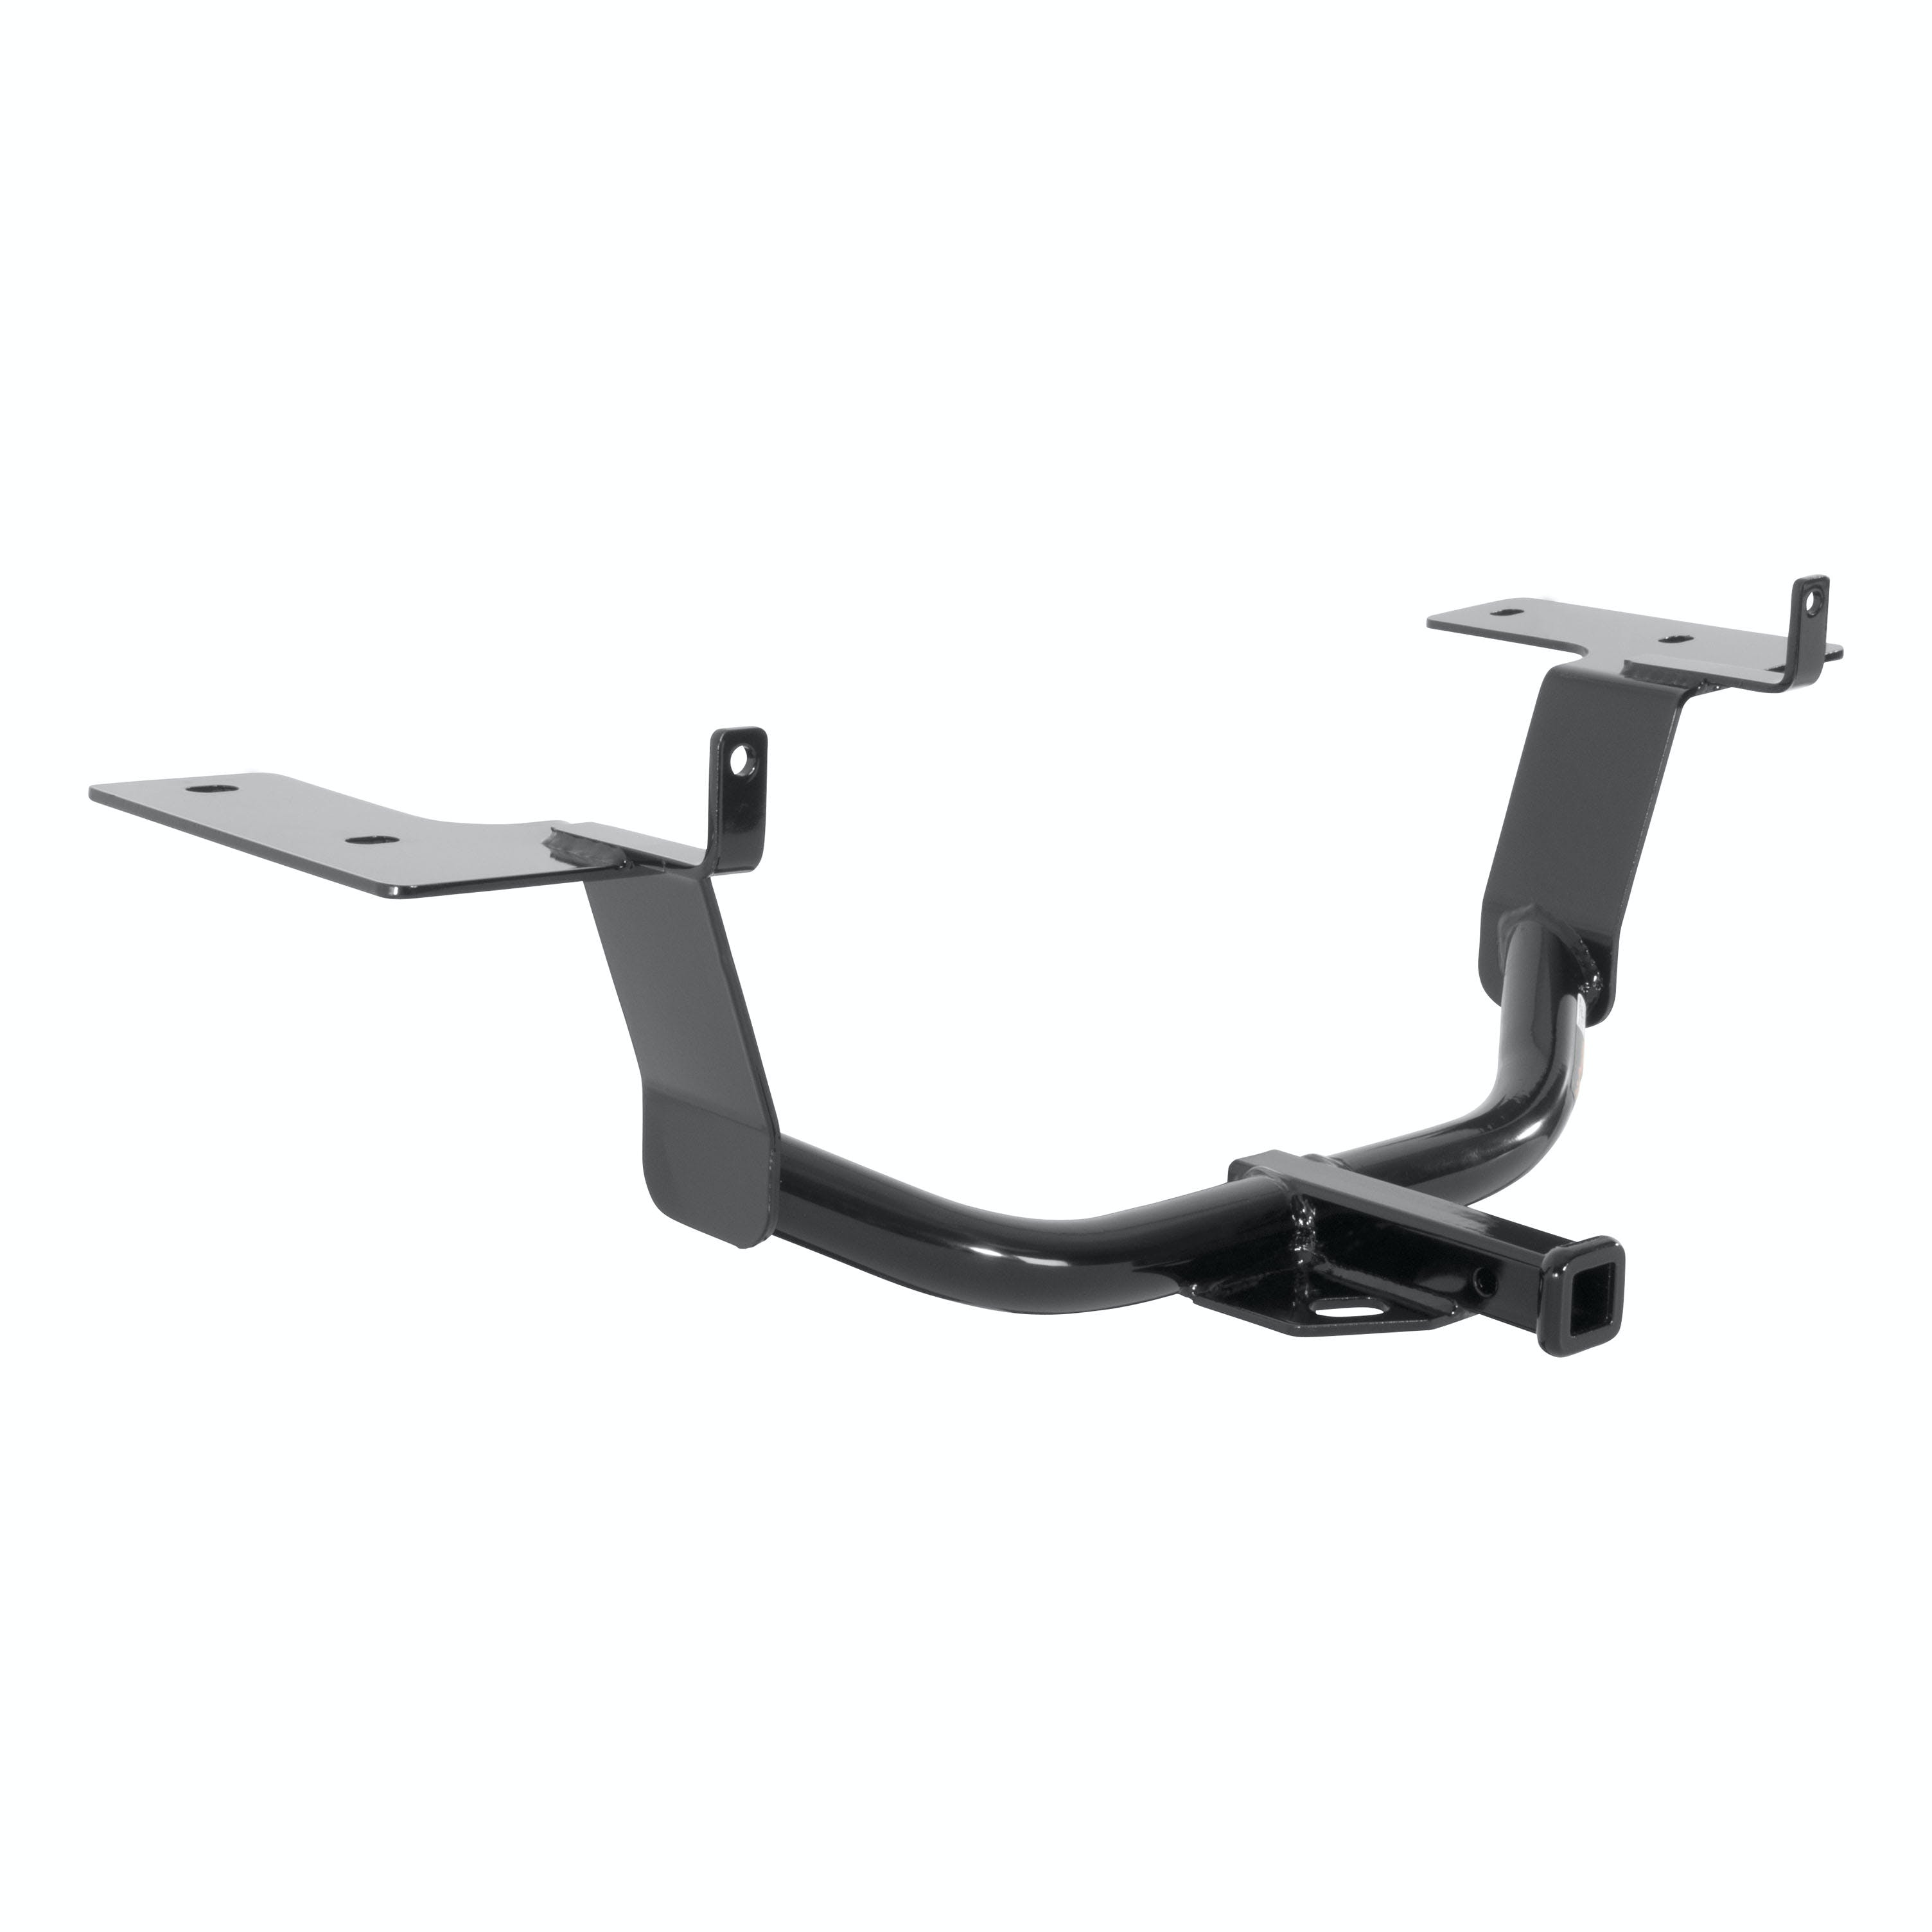 CURT 11013 Class 1 Trailer Hitch, 1-1/4 Receiver, Select Cadillac CTS